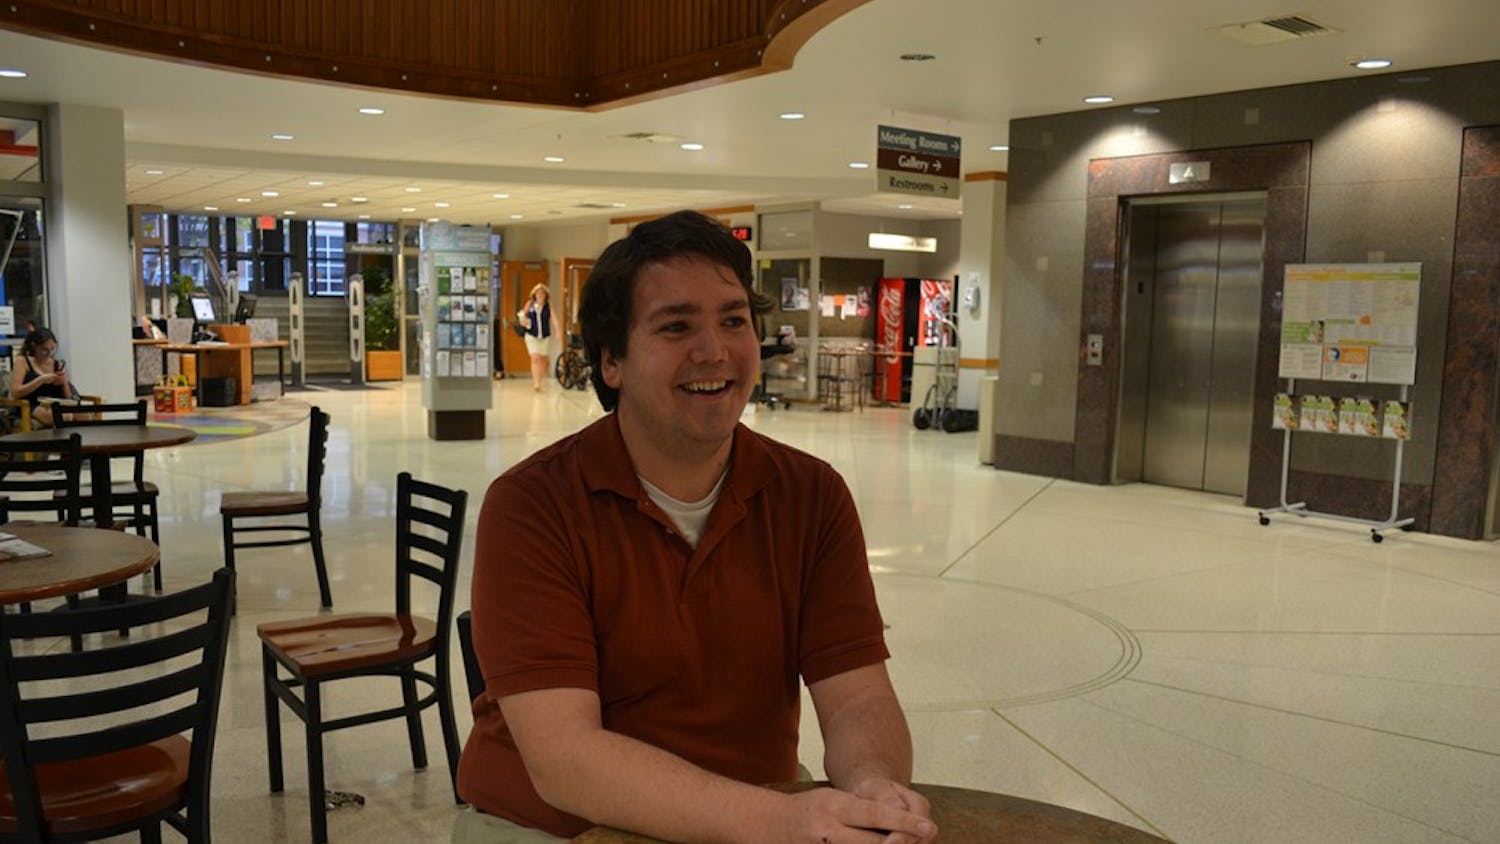 Dakota Hudelson, co-facilitator for the Bloomington Green Party, speaks in an interview about the goals of the local party at the Monroe County Public Library.